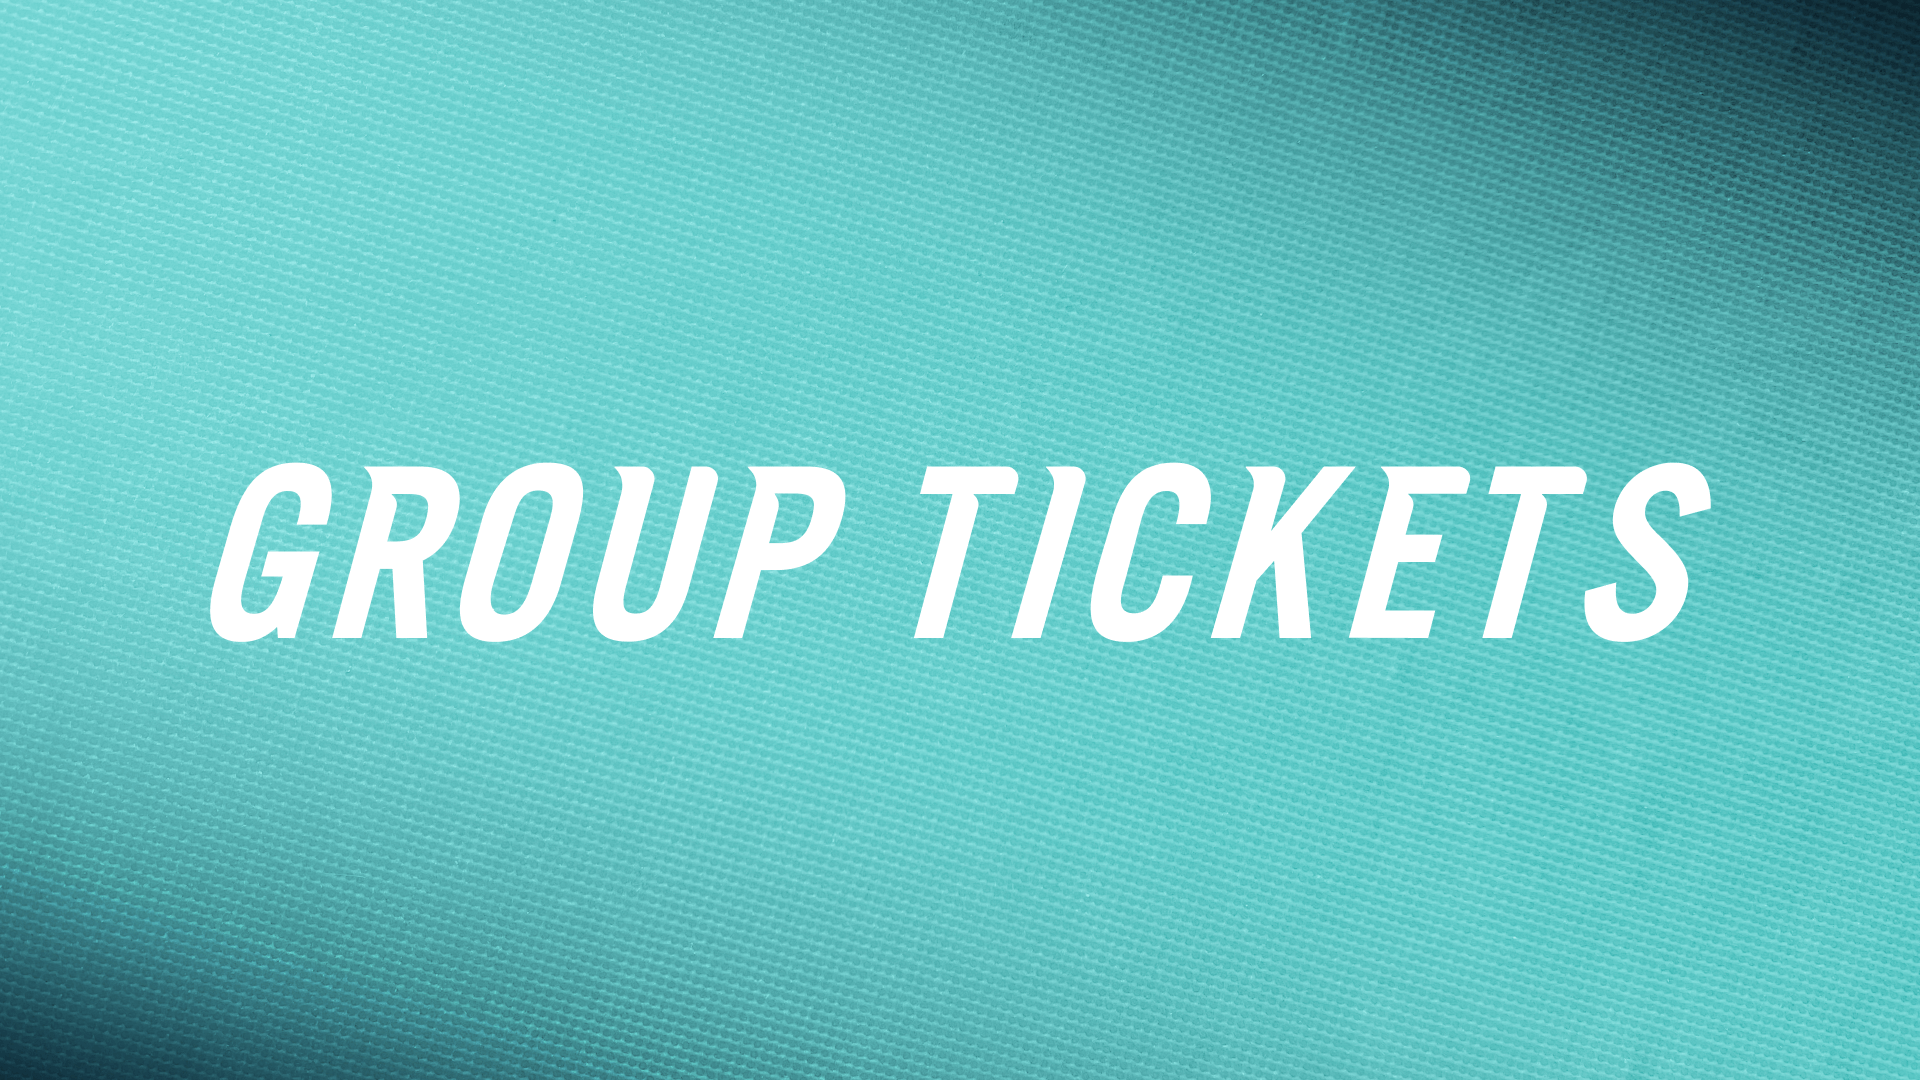 A graphic that says "Group Tickets"  and links to a page to purchase them.